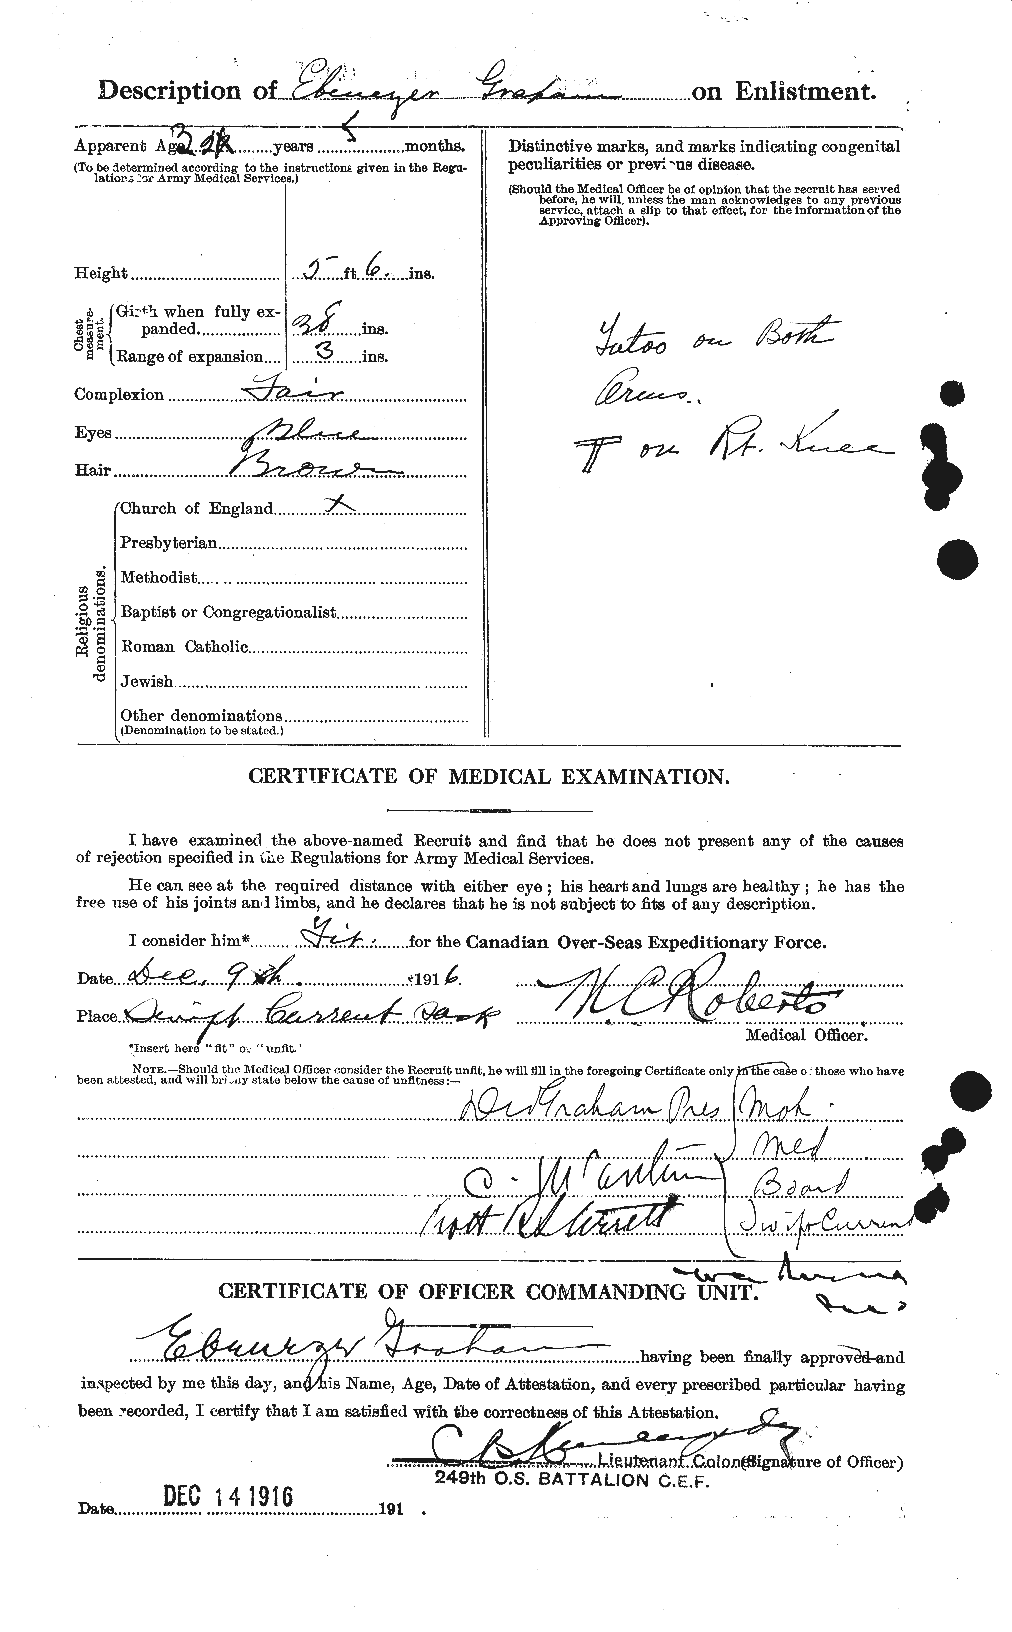 Personnel Records of the First World War - CEF 357549b